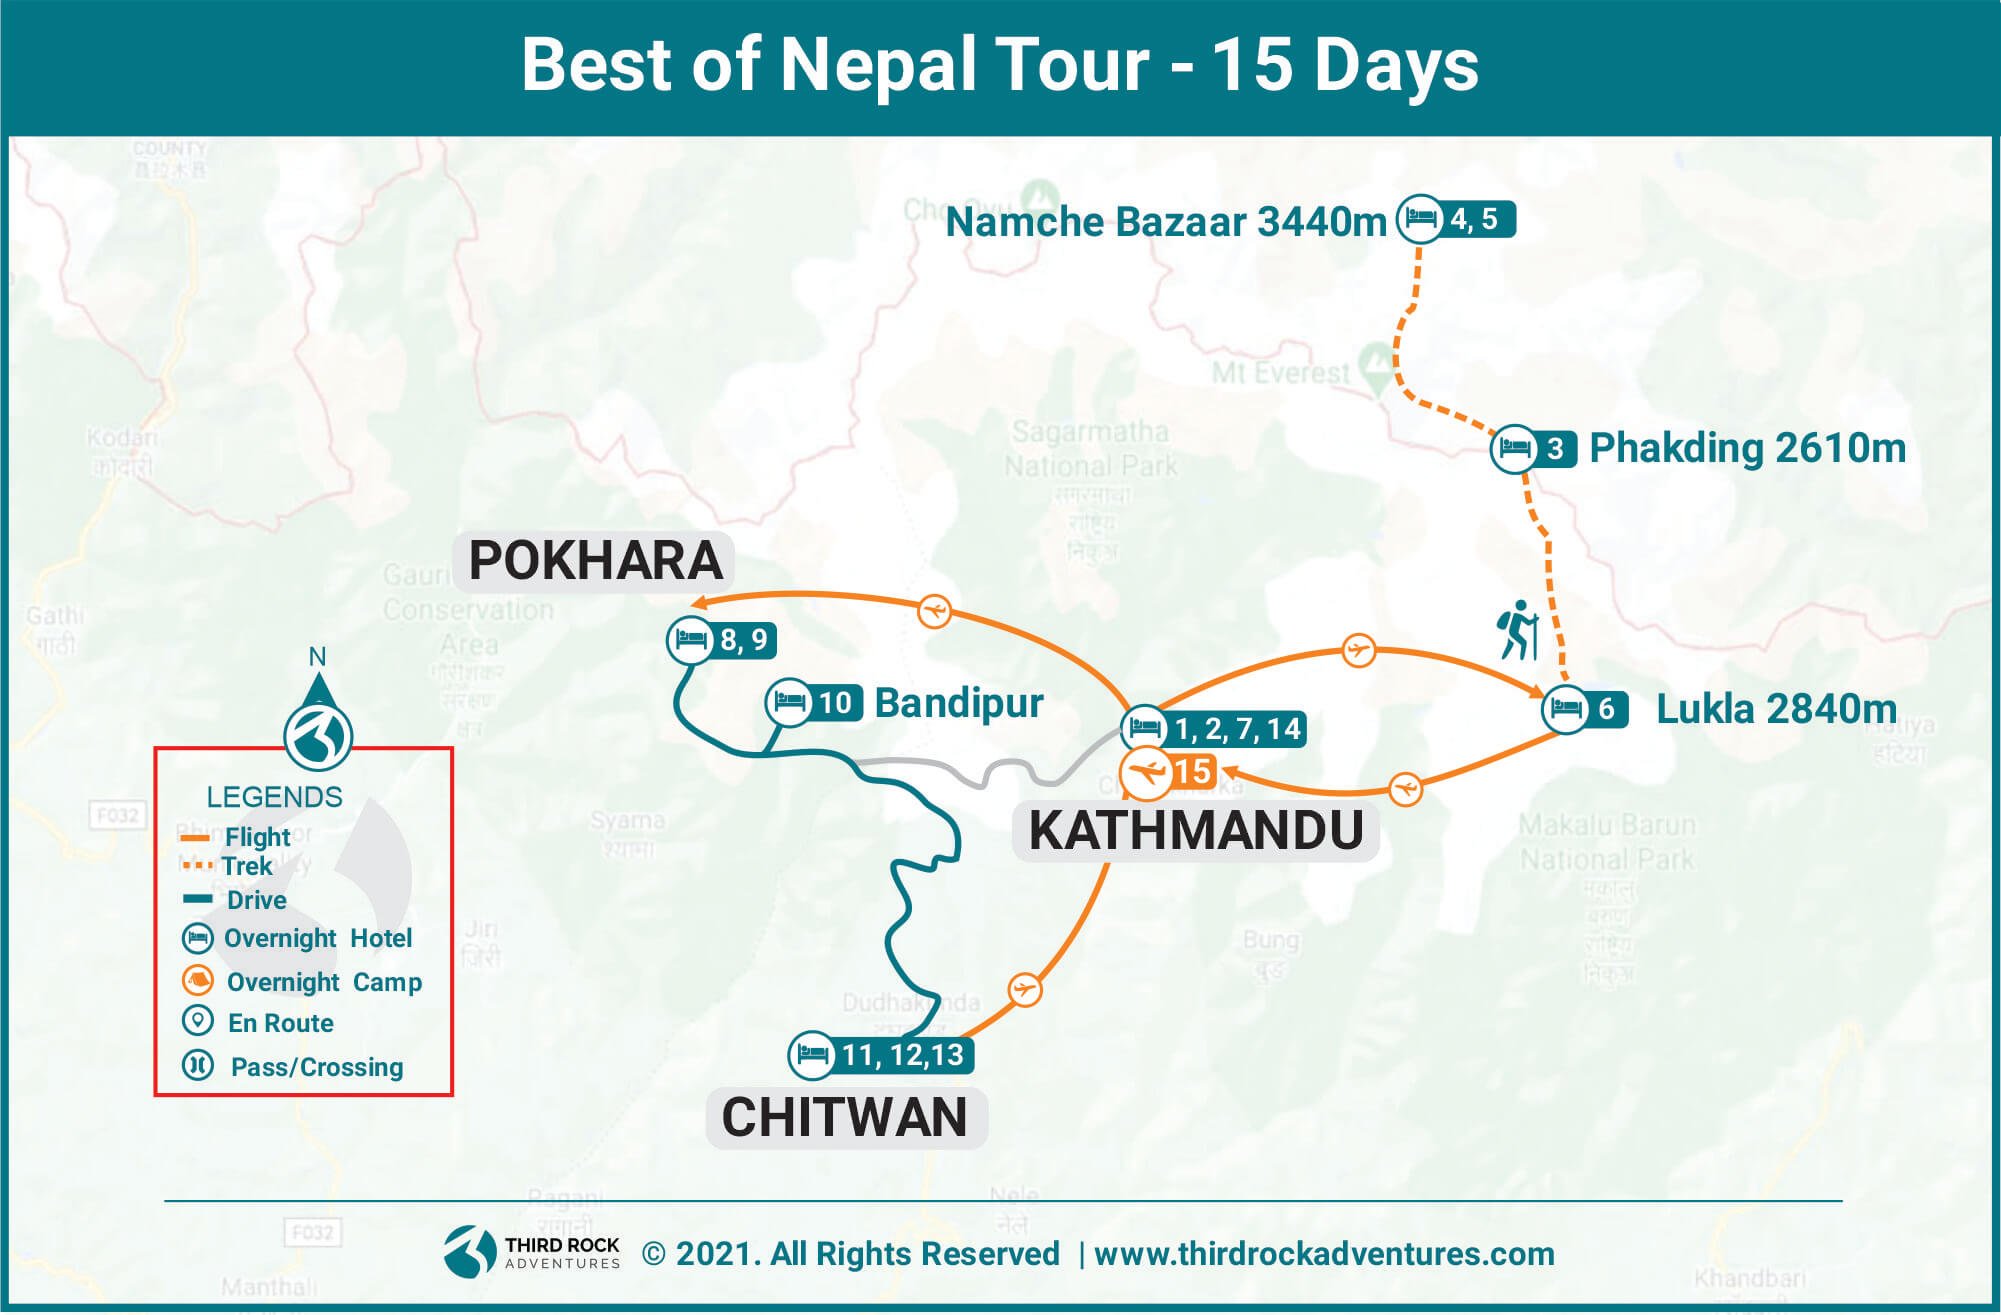 Best of Nepal Tour Route Map